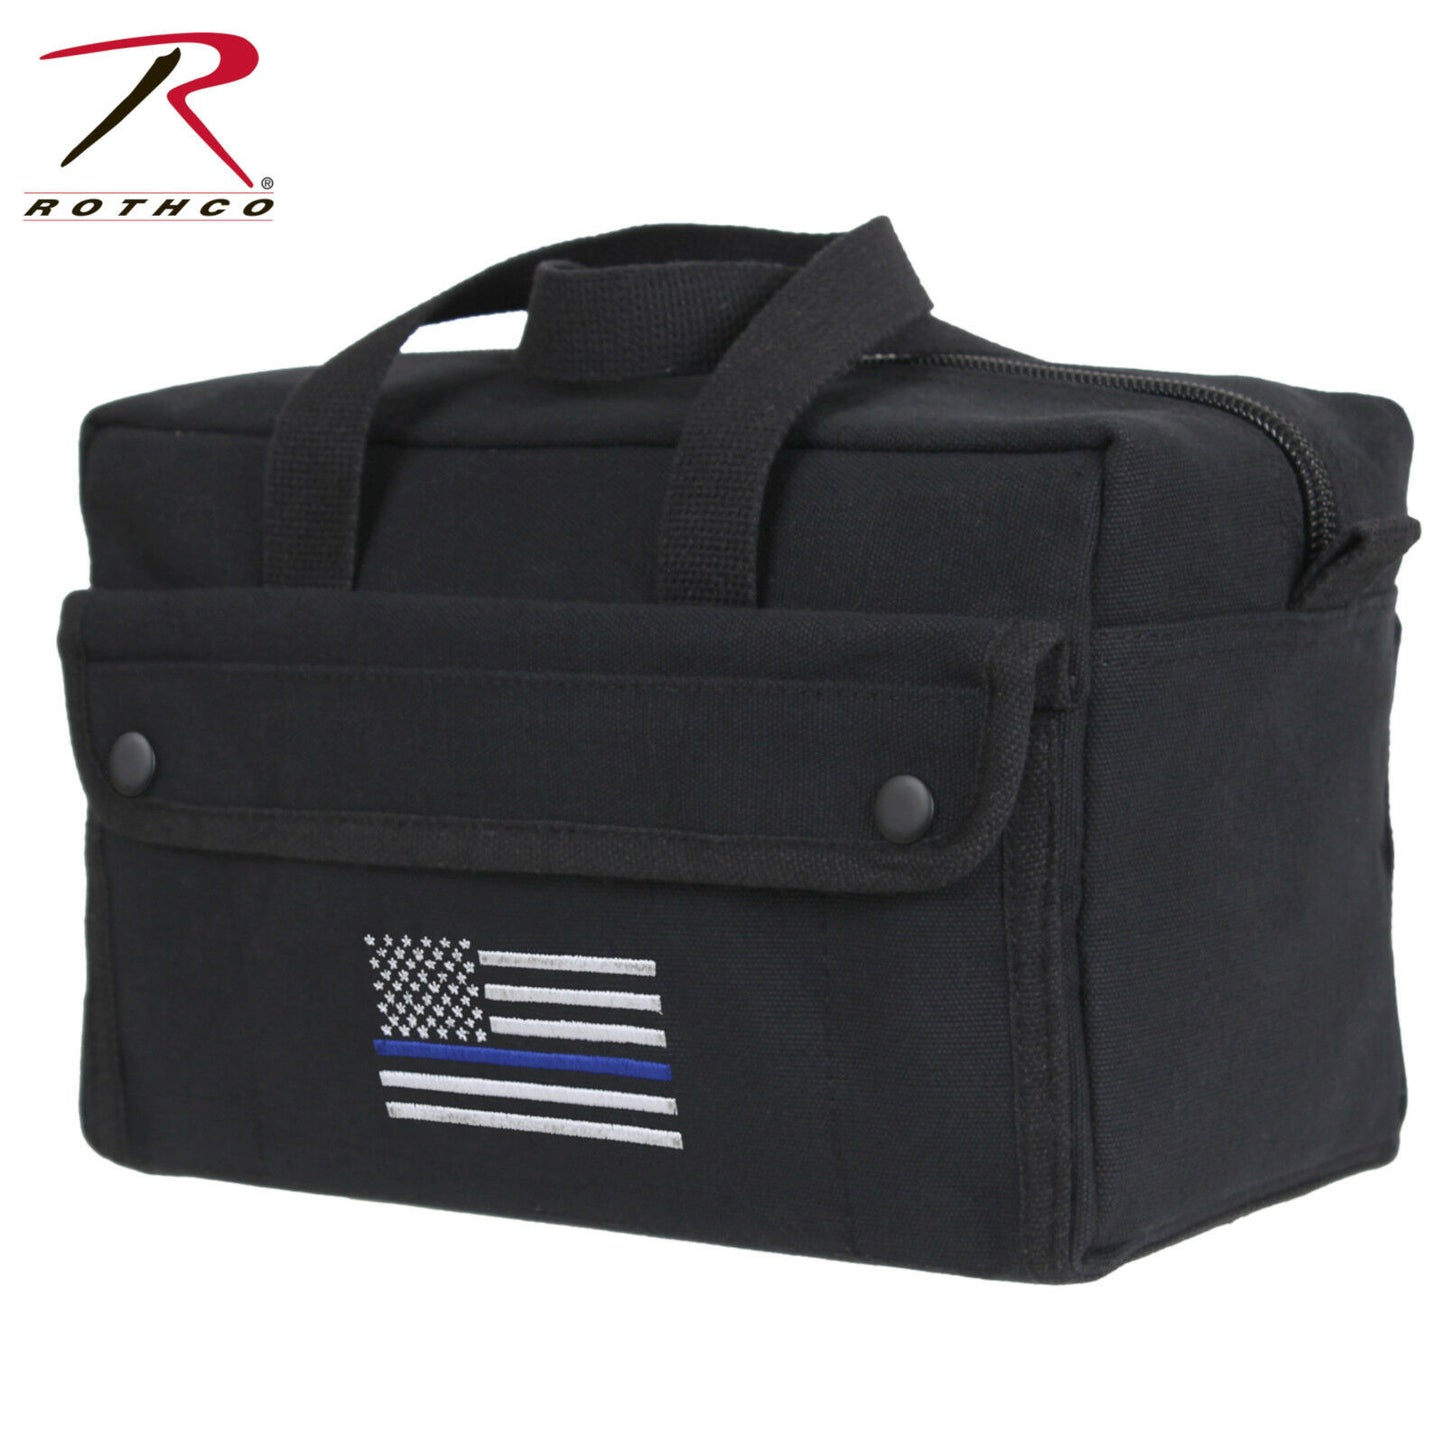 Rothco Heavyweight Black Canvas Tool Bag With Embroidered Thin Blue Line US Flag